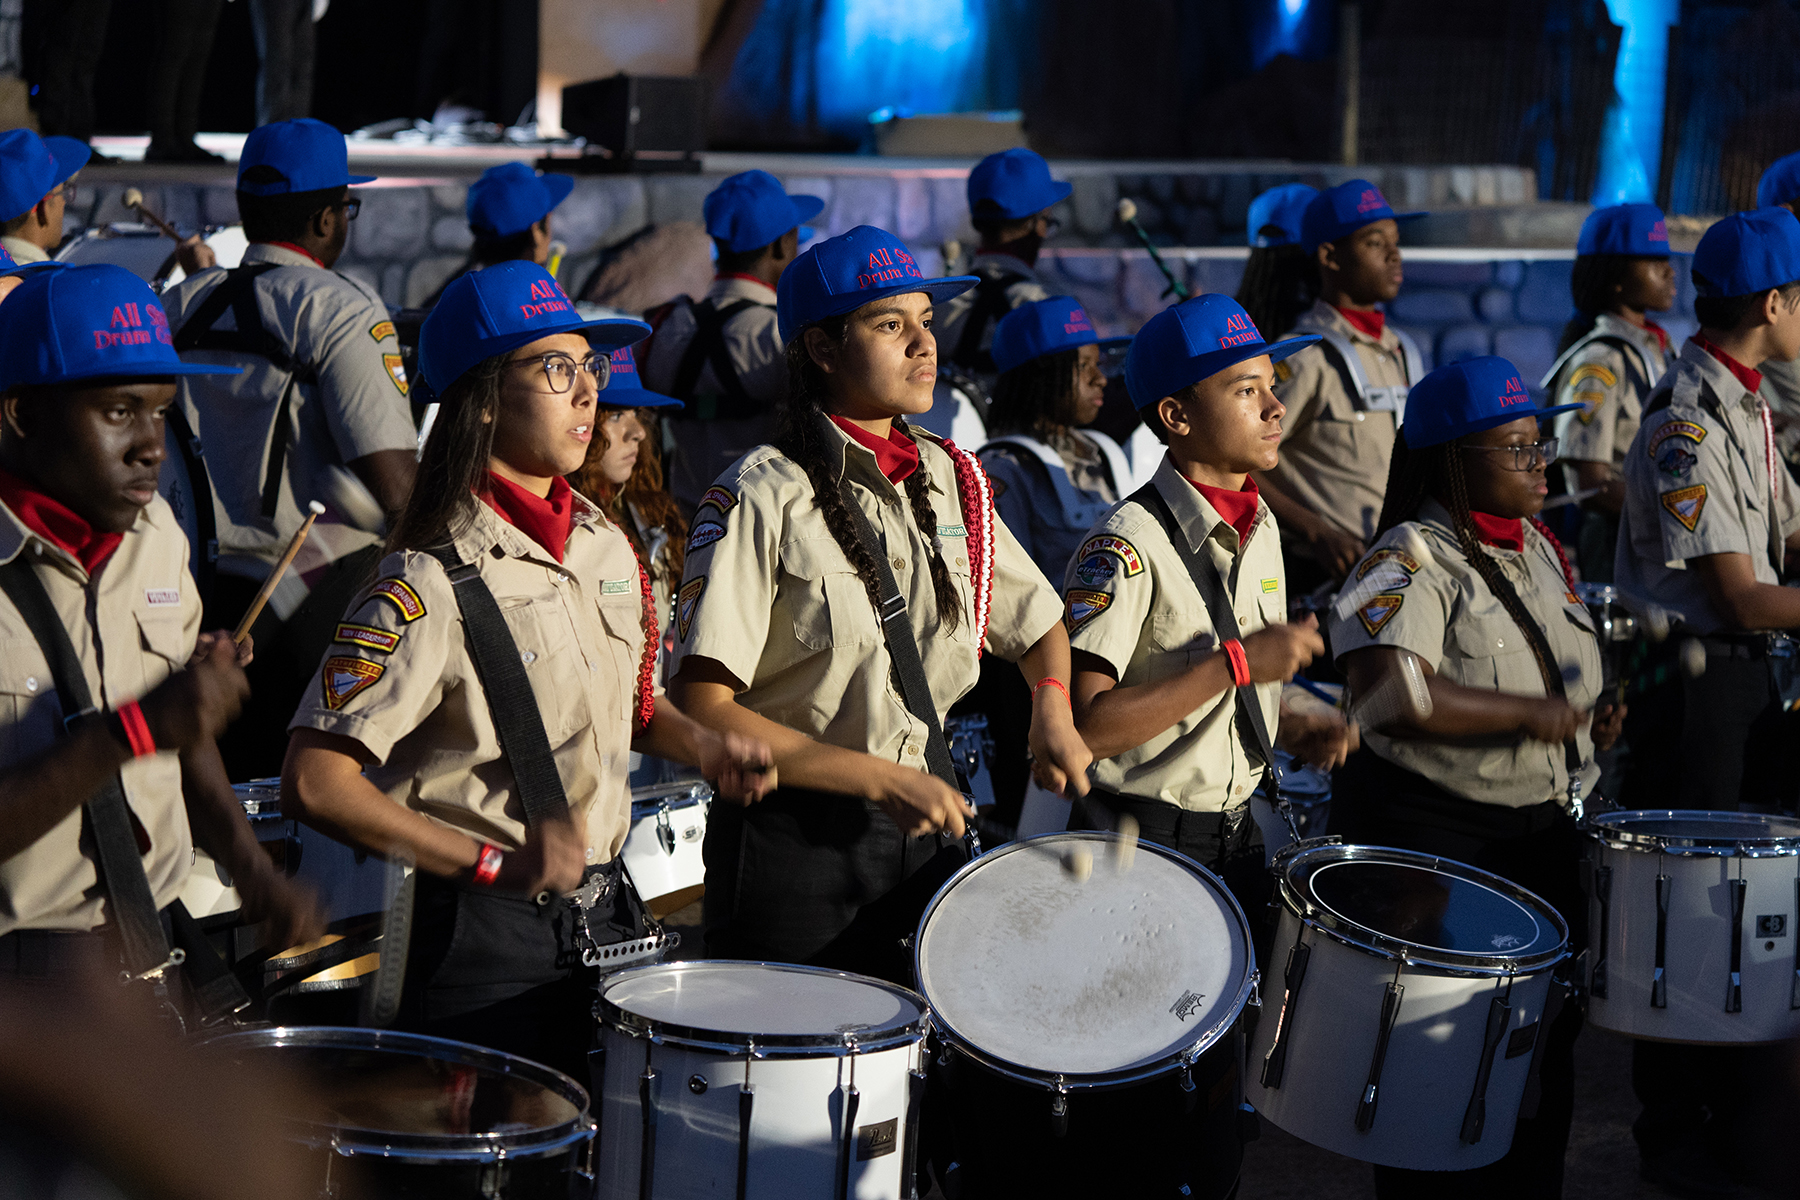 a multicultural group of young people drumming together in uniform.